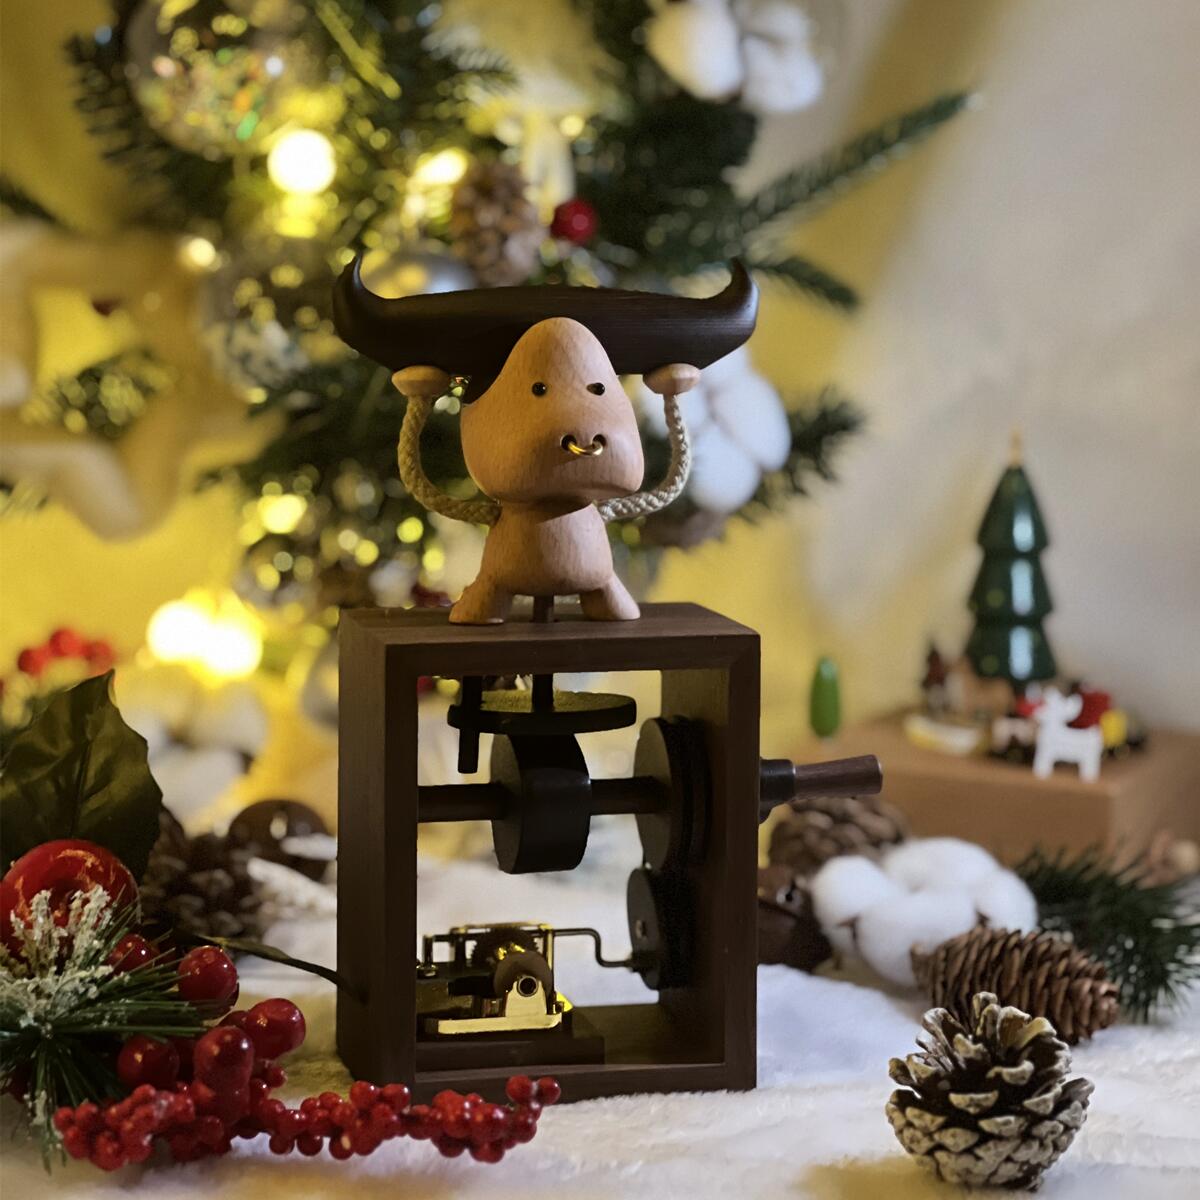 Handcrafted Wooden Cow-Themed Hand-Cranked Music Box (Melody : Castle in the Sky)